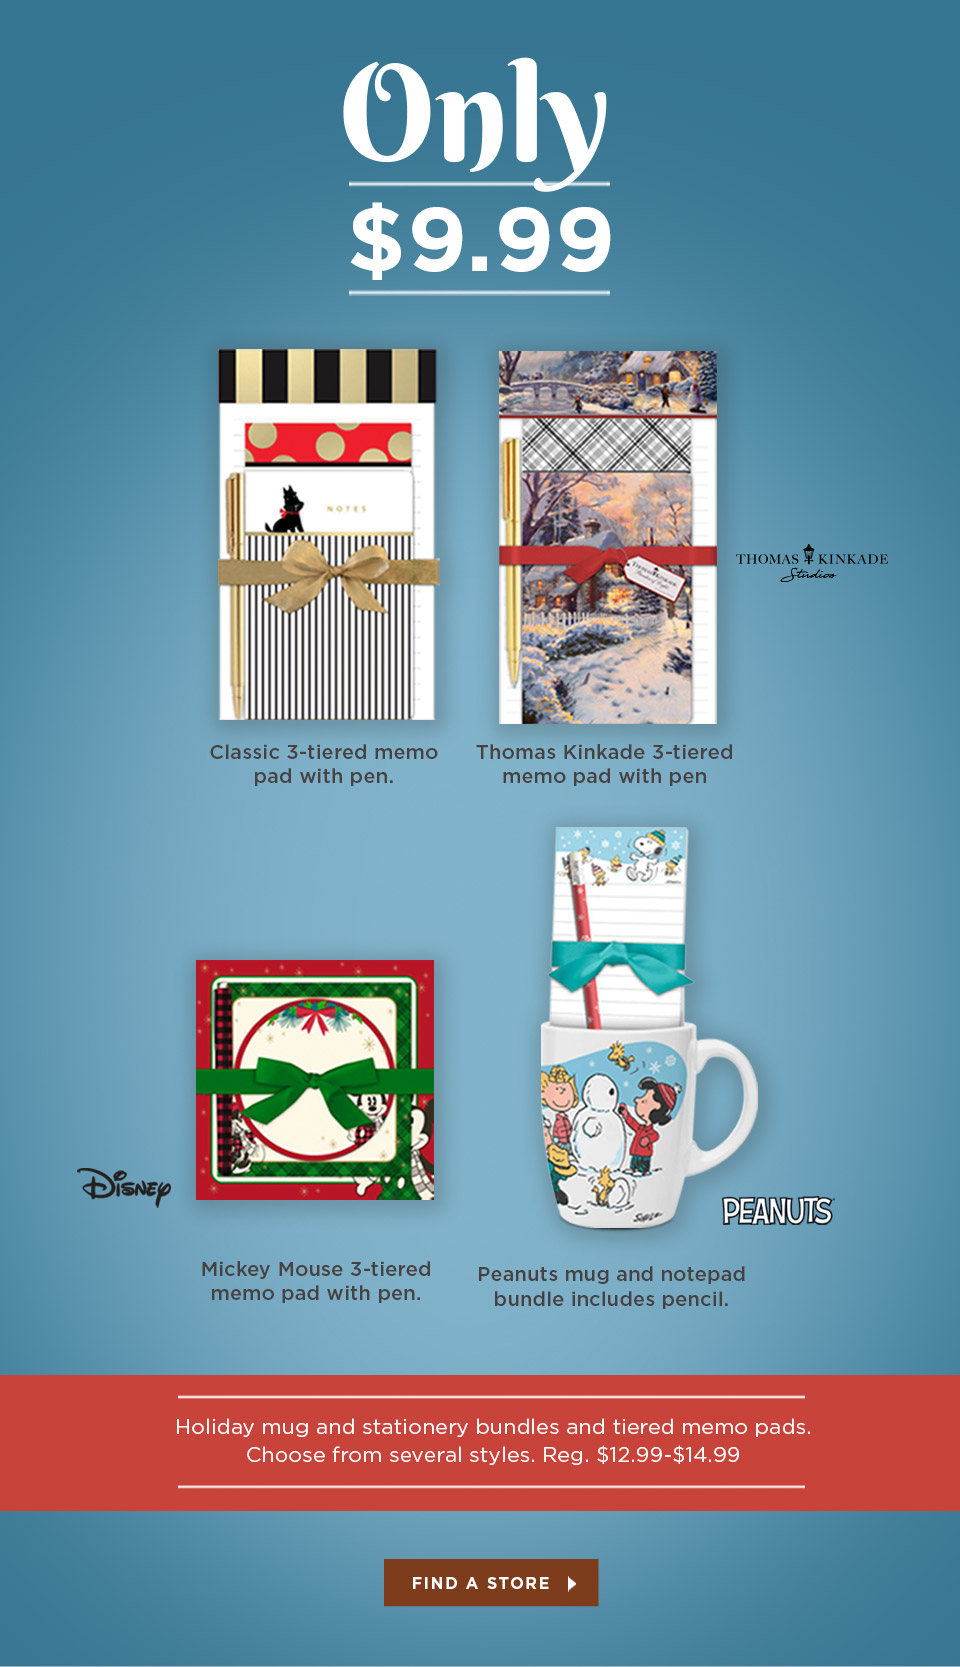 Only $9.99. Holiday mug and stationery bundles and tiered memo pads.